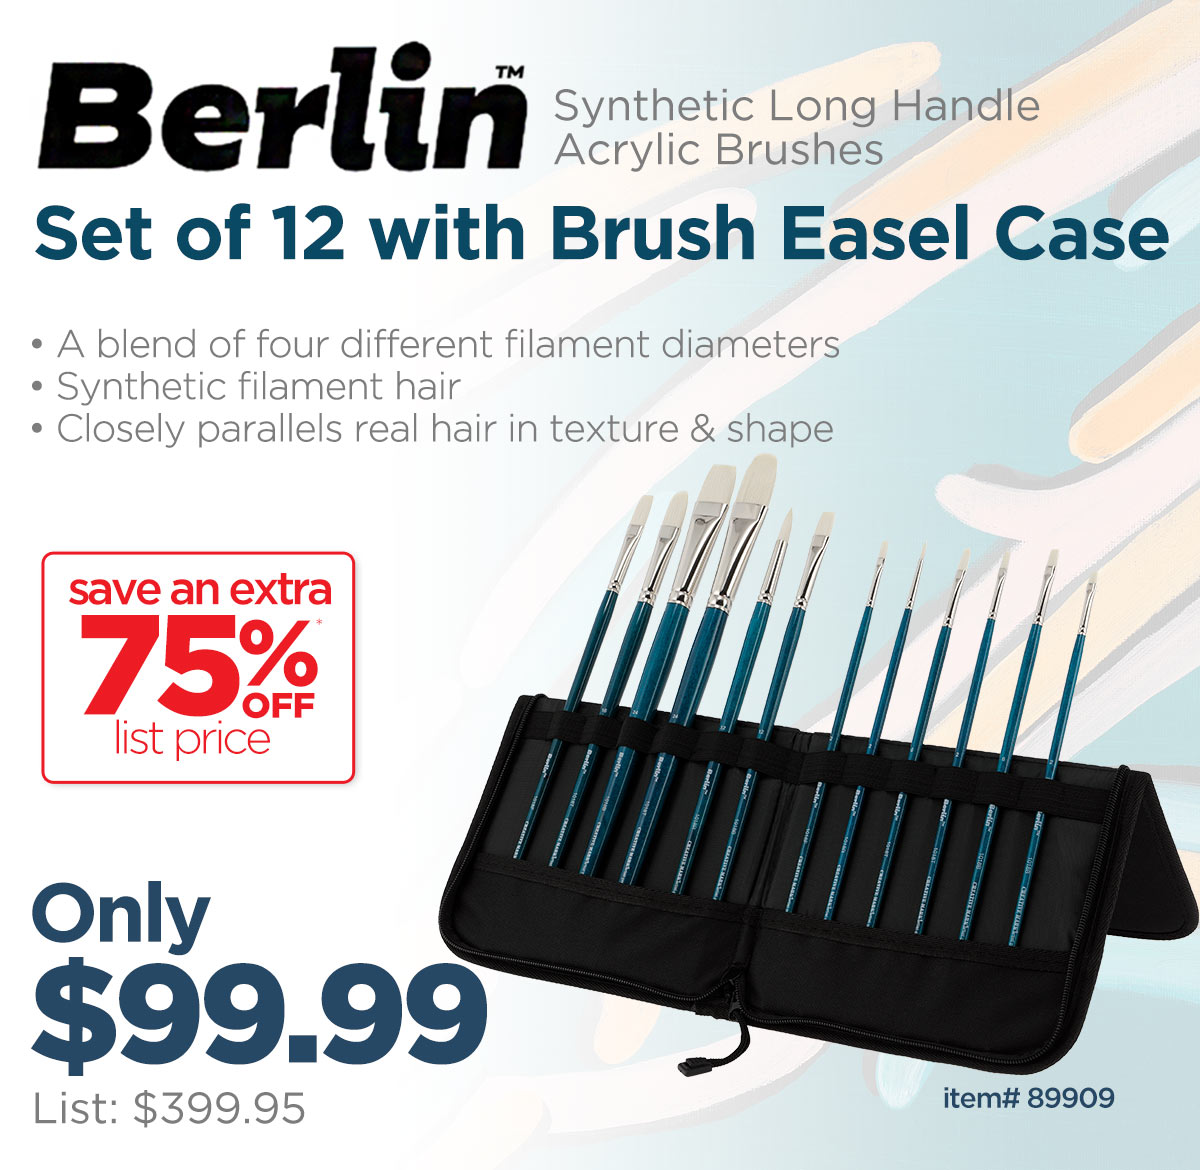 Berlin Acrylic Brush Set of 12 with Brush Easel Case